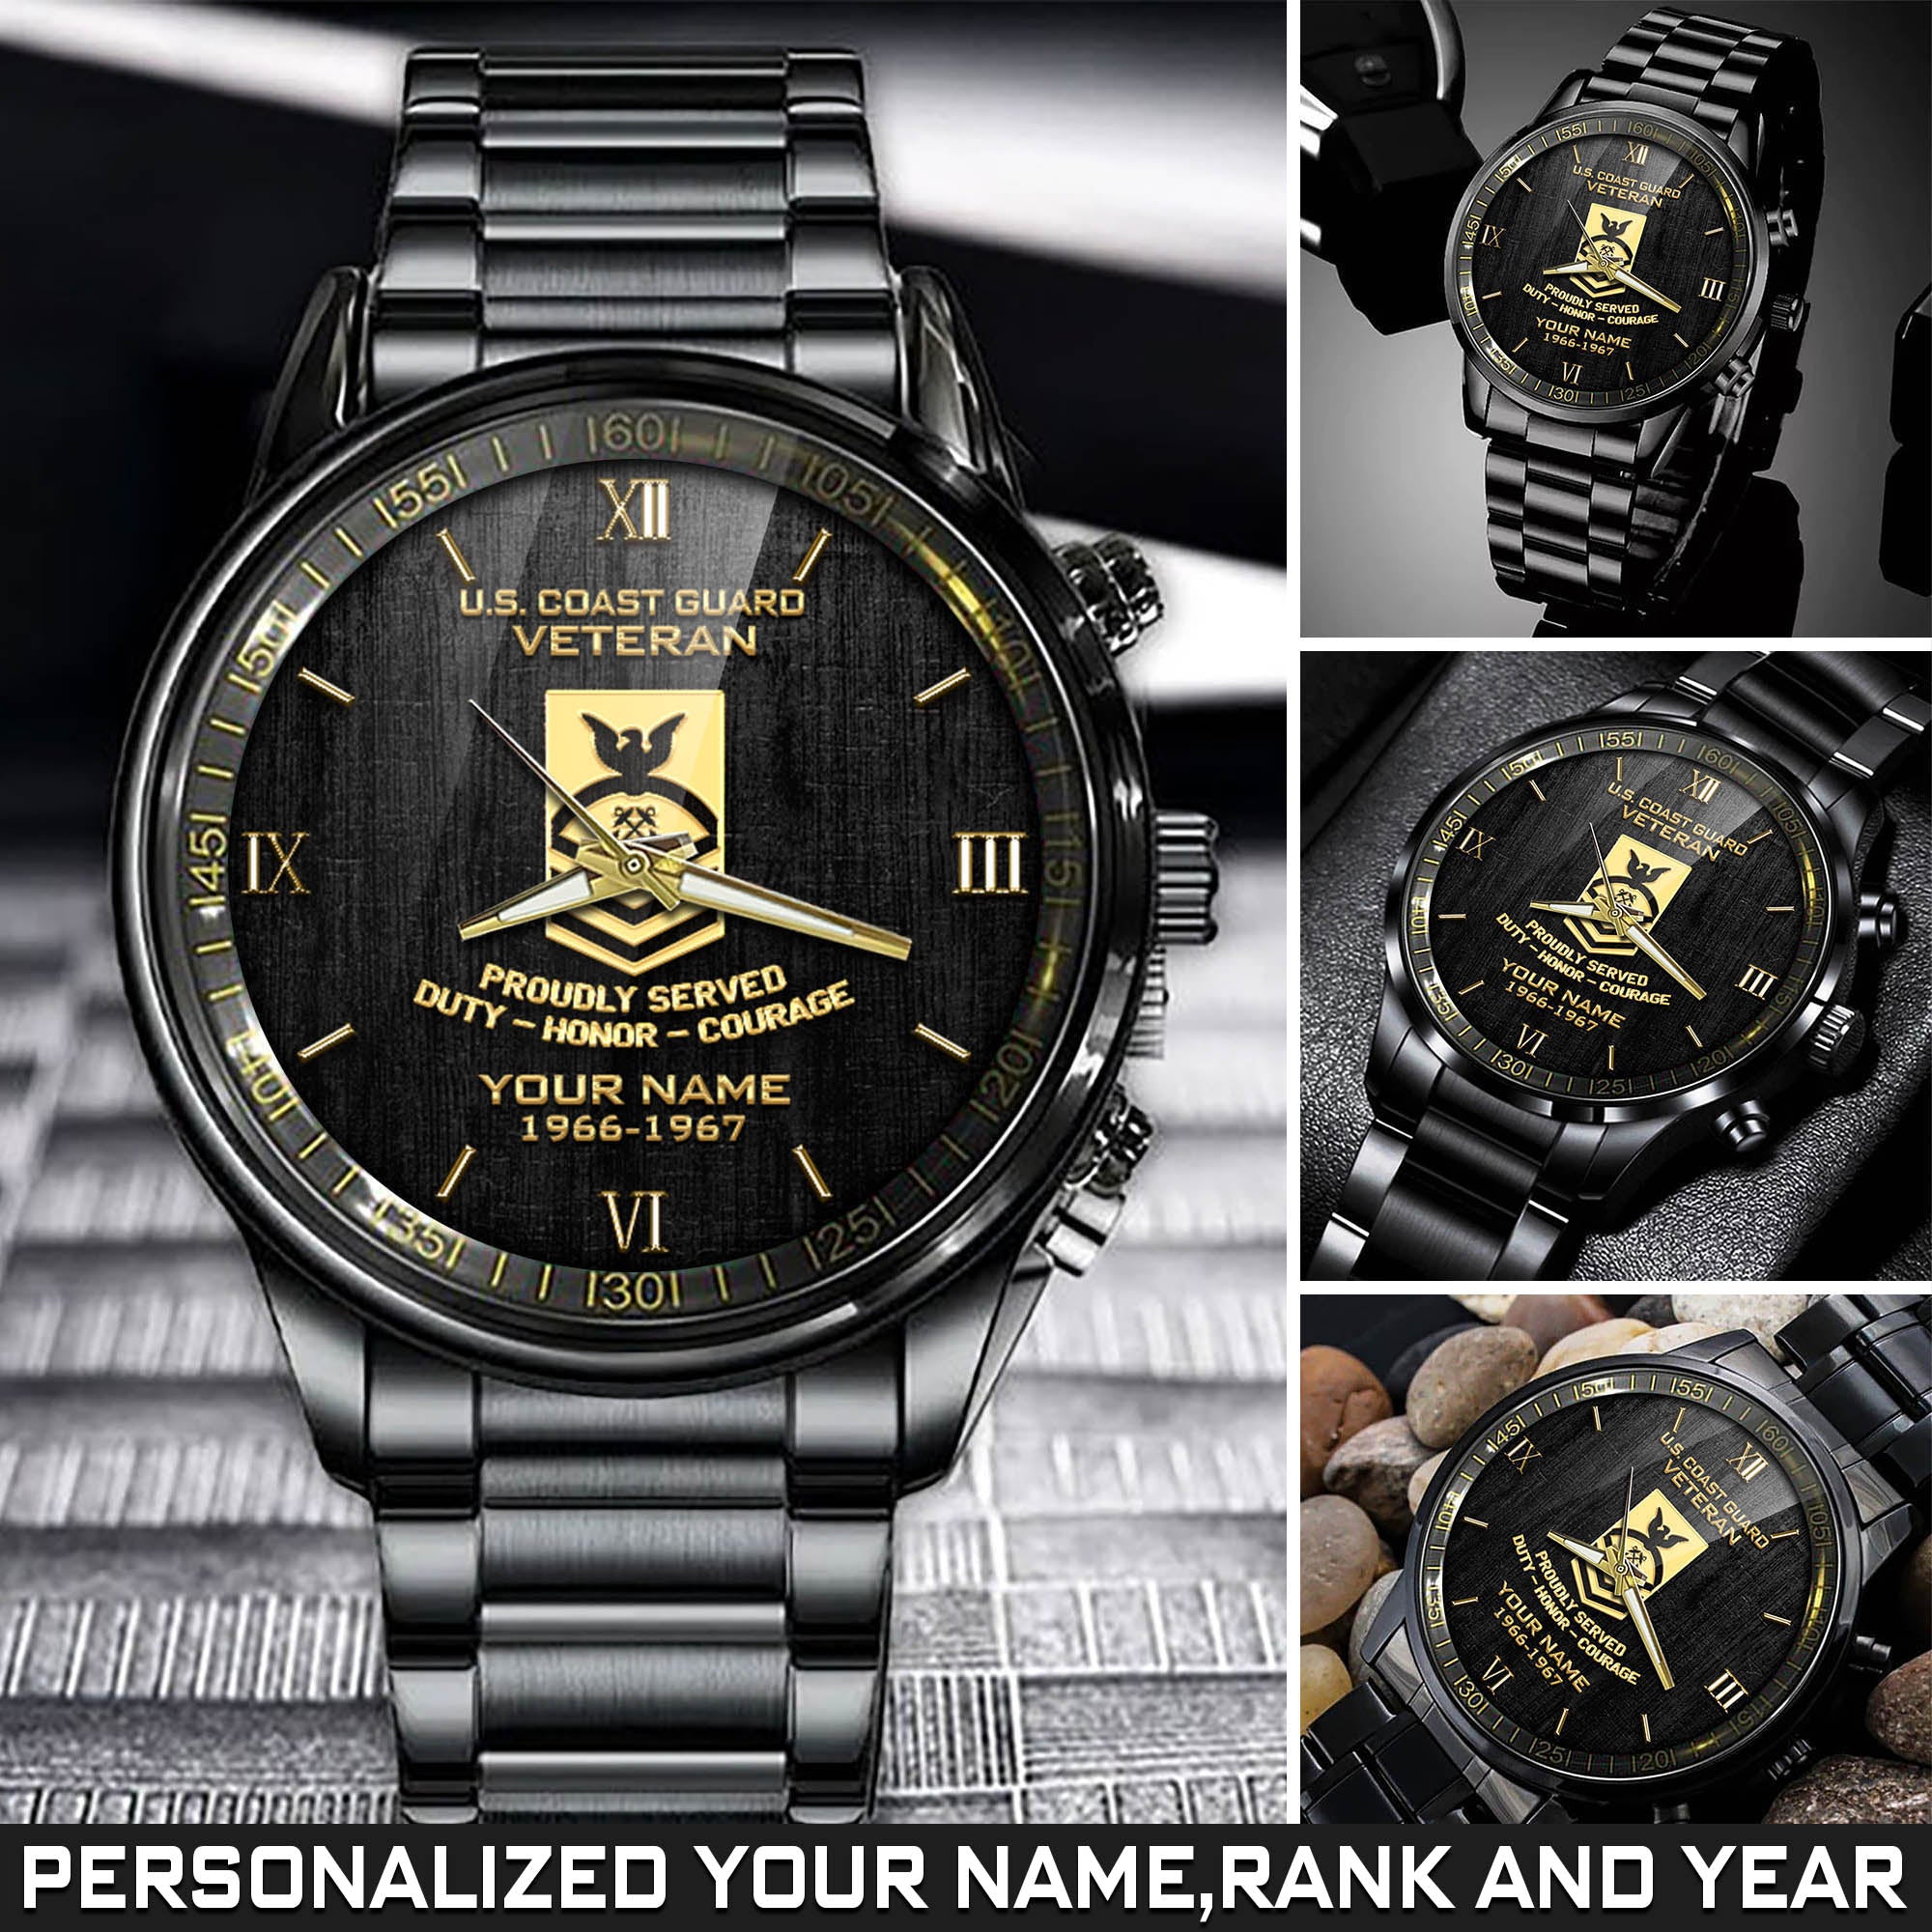 U.S. Coast Guard Veteran Watch Proudly Served Duty Honor Courage Black Watch Personalized Veteran Gift